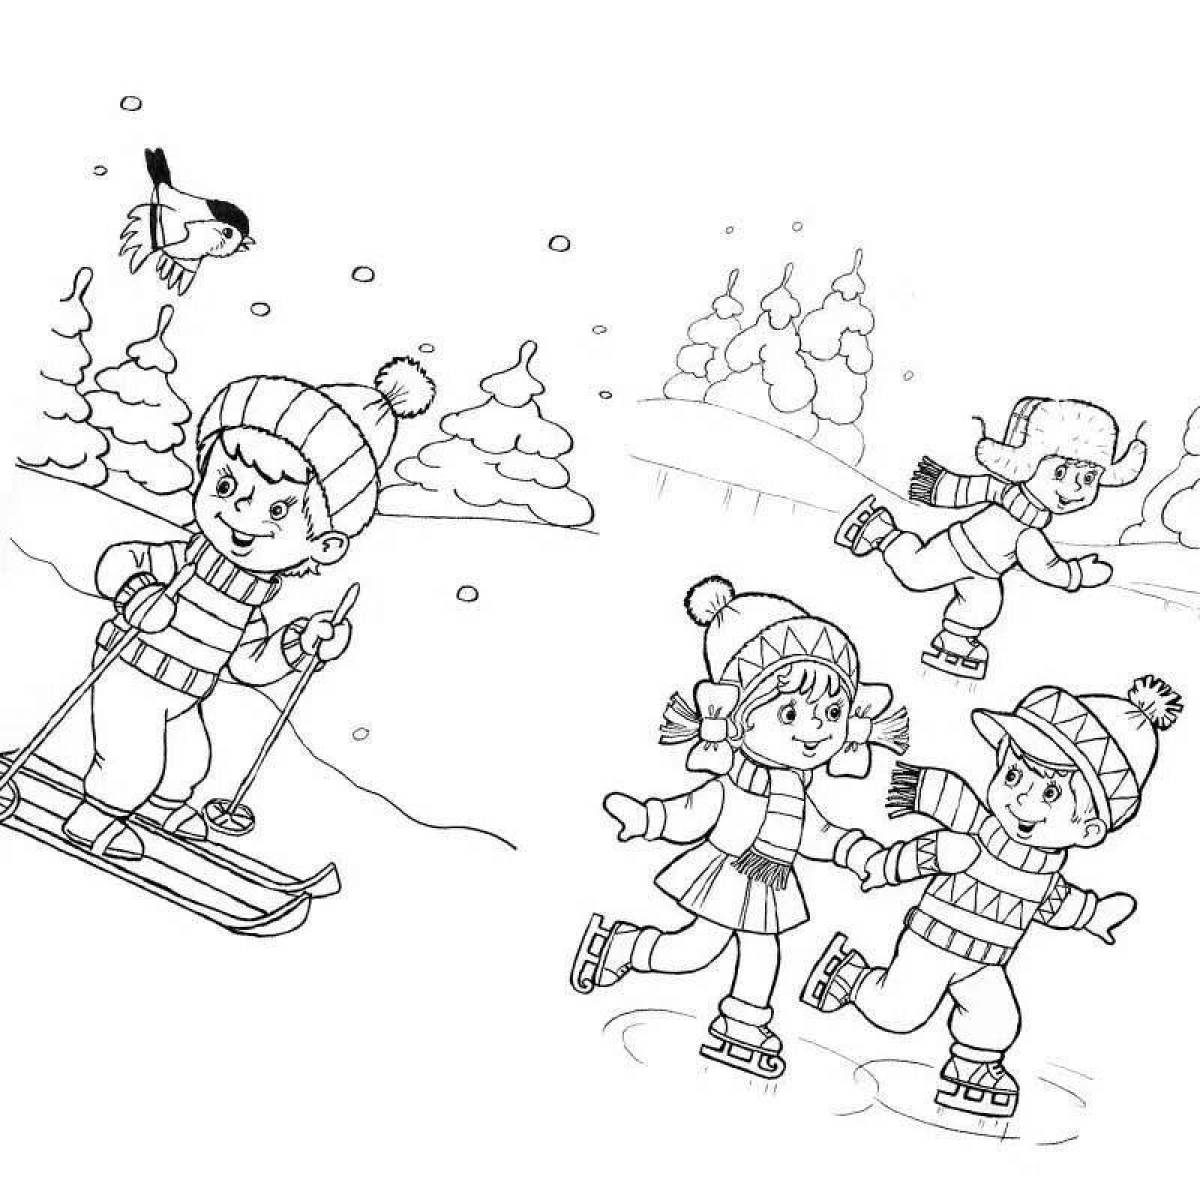 Innovative winter sports coloring book for preschoolers